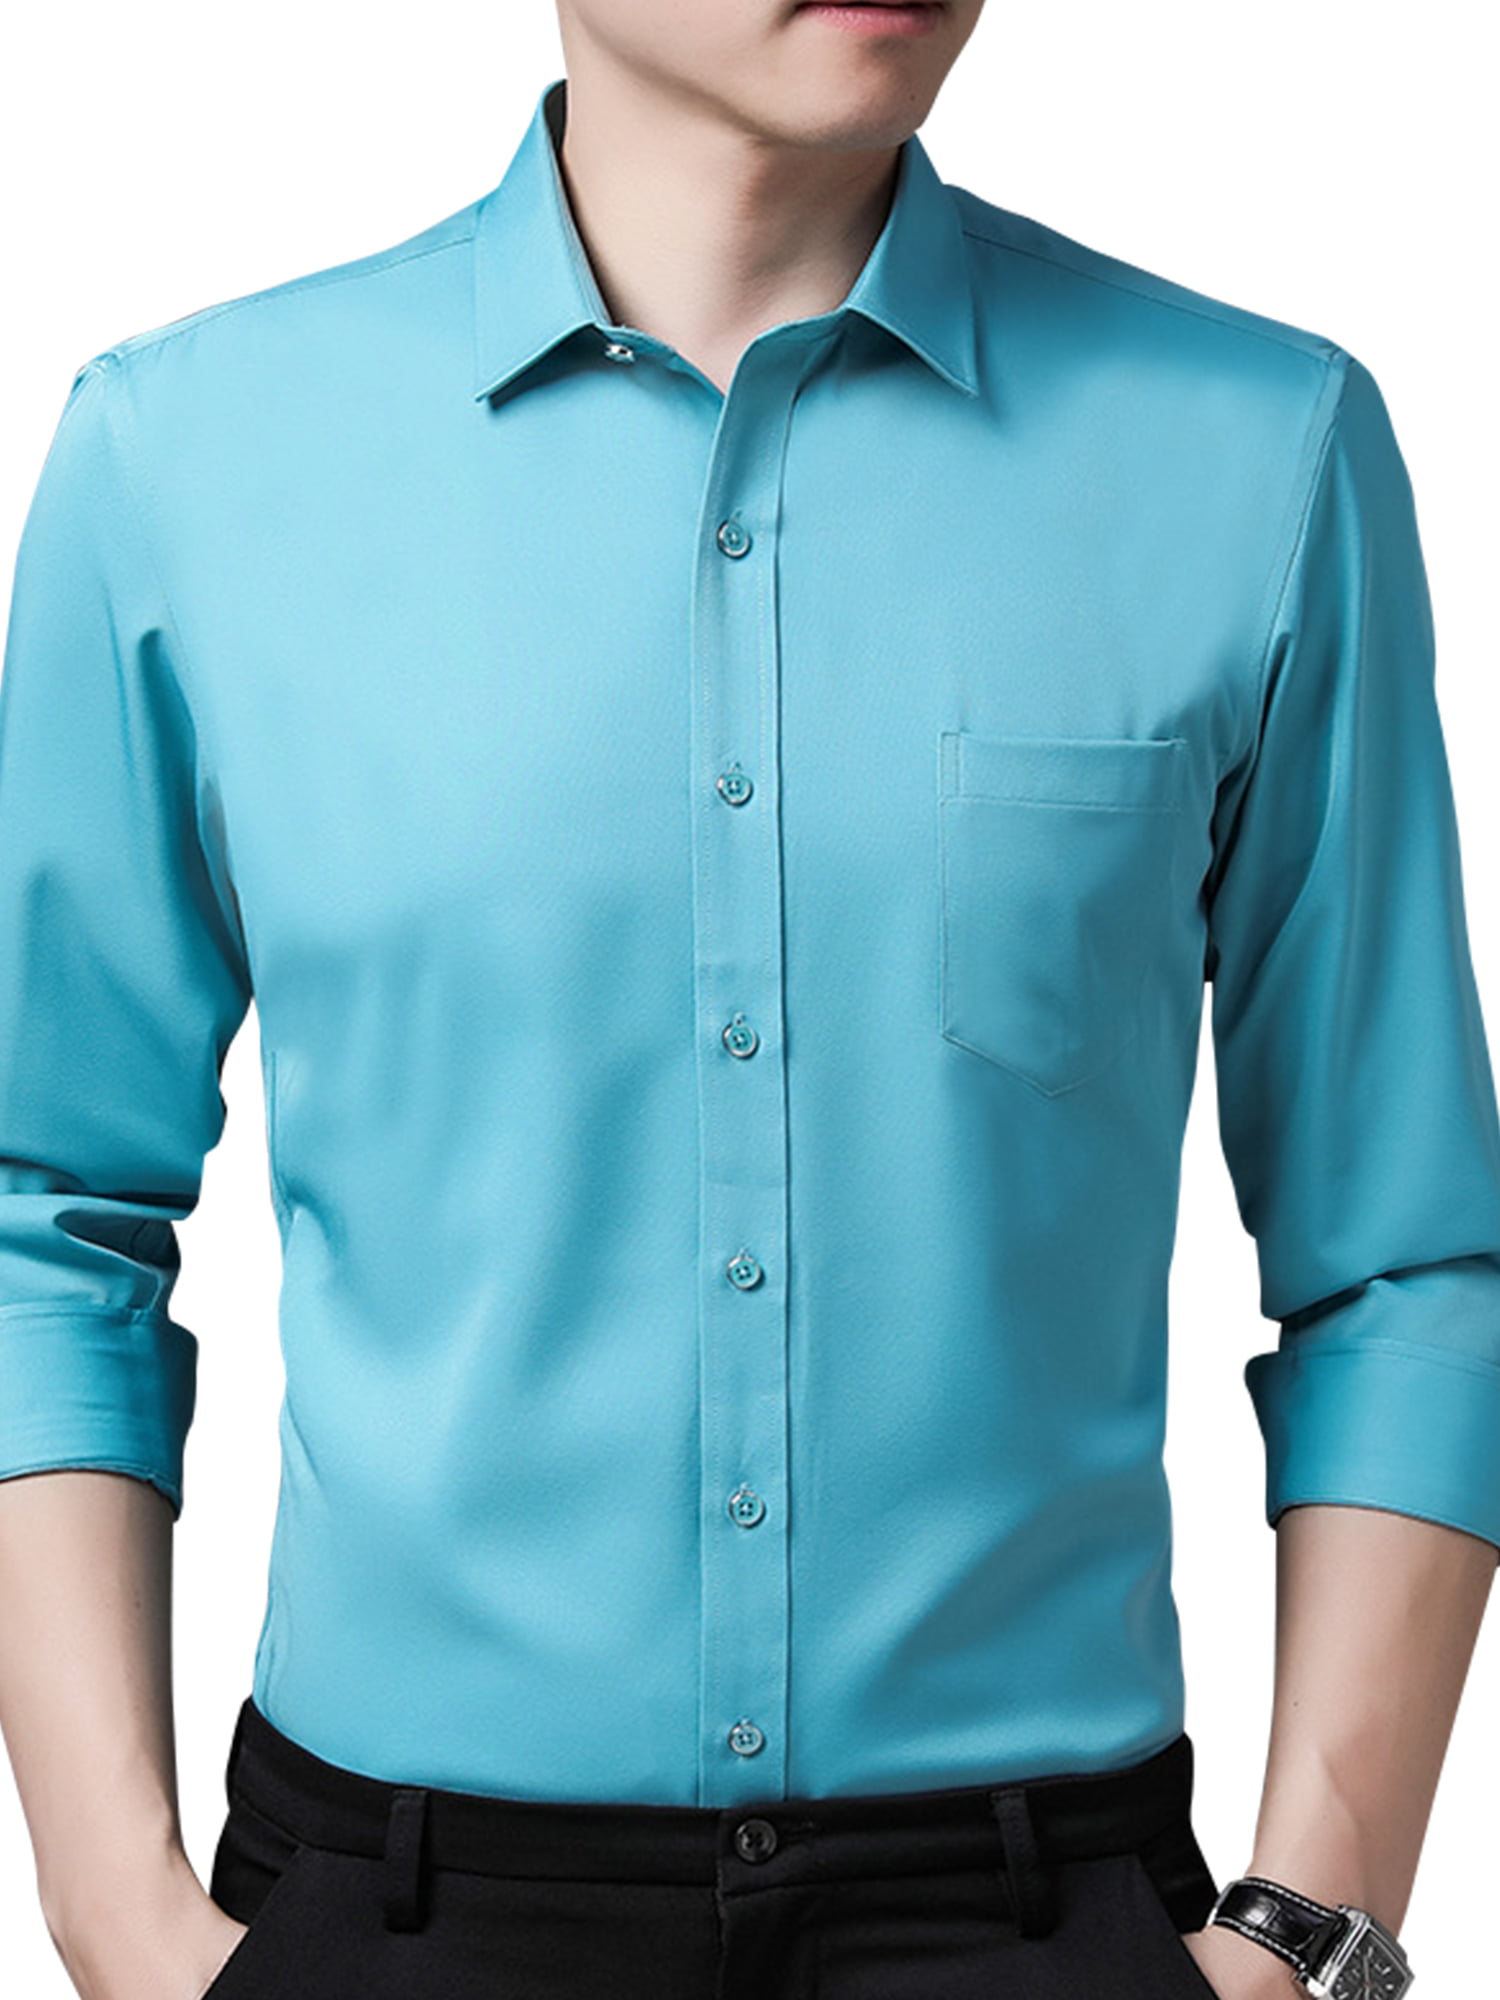 Sweatwater Men Slim Fit Business Casual Button-Down Long-Sleeve Shirt 